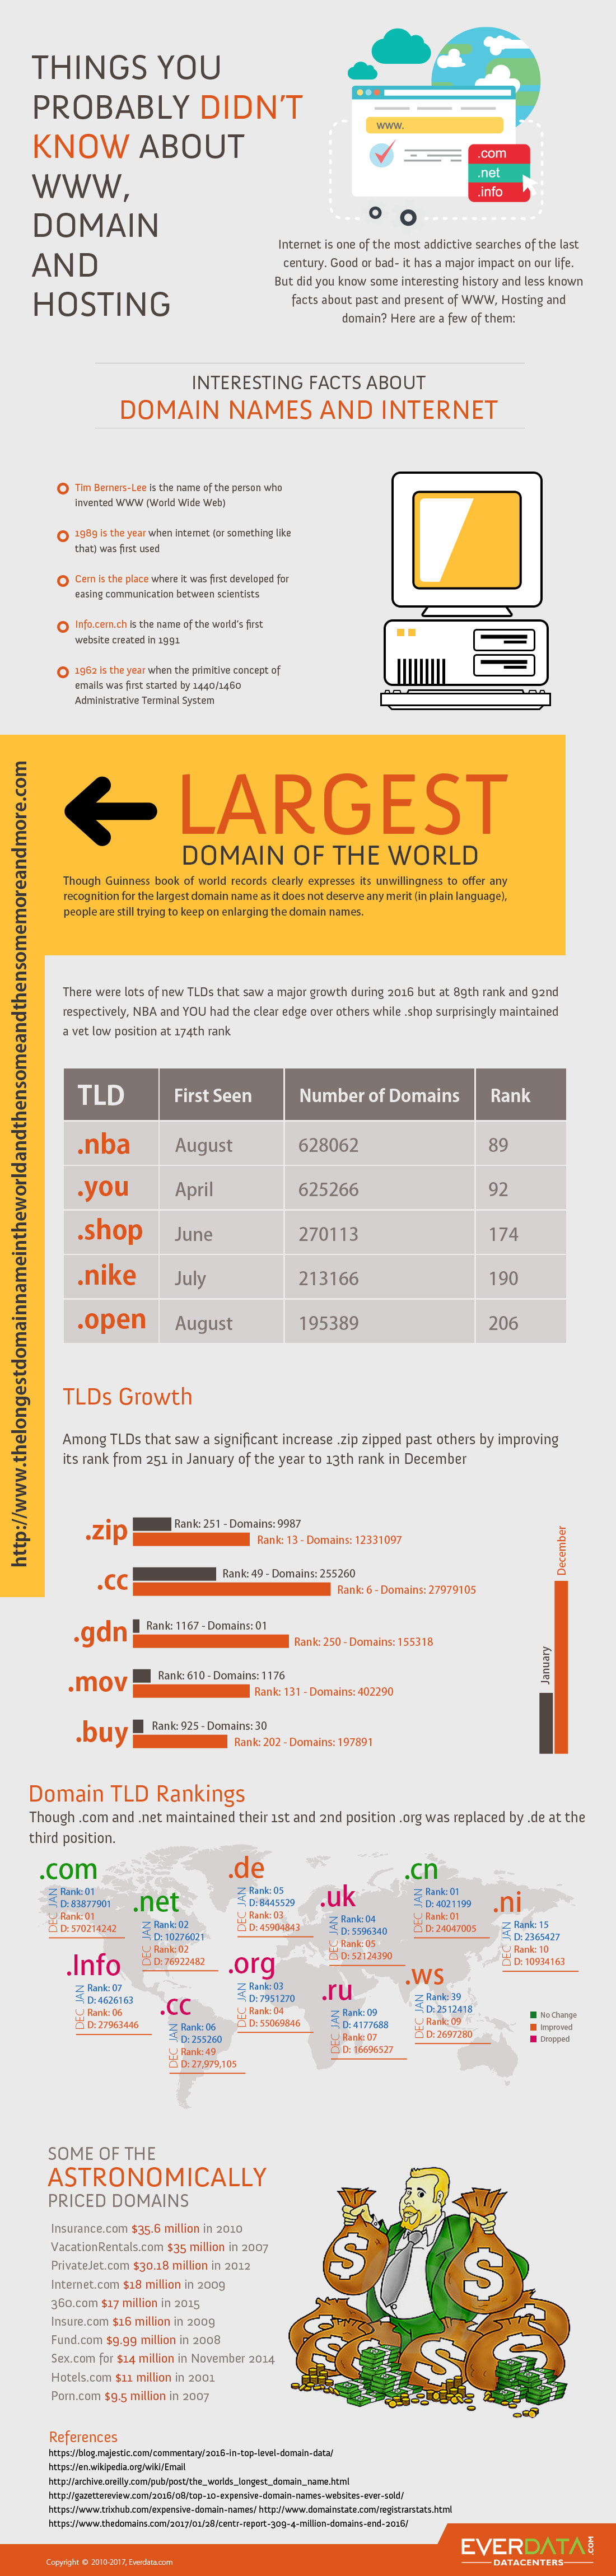 Infographic - Things you probably didn’t know about WWW, domain and hosting